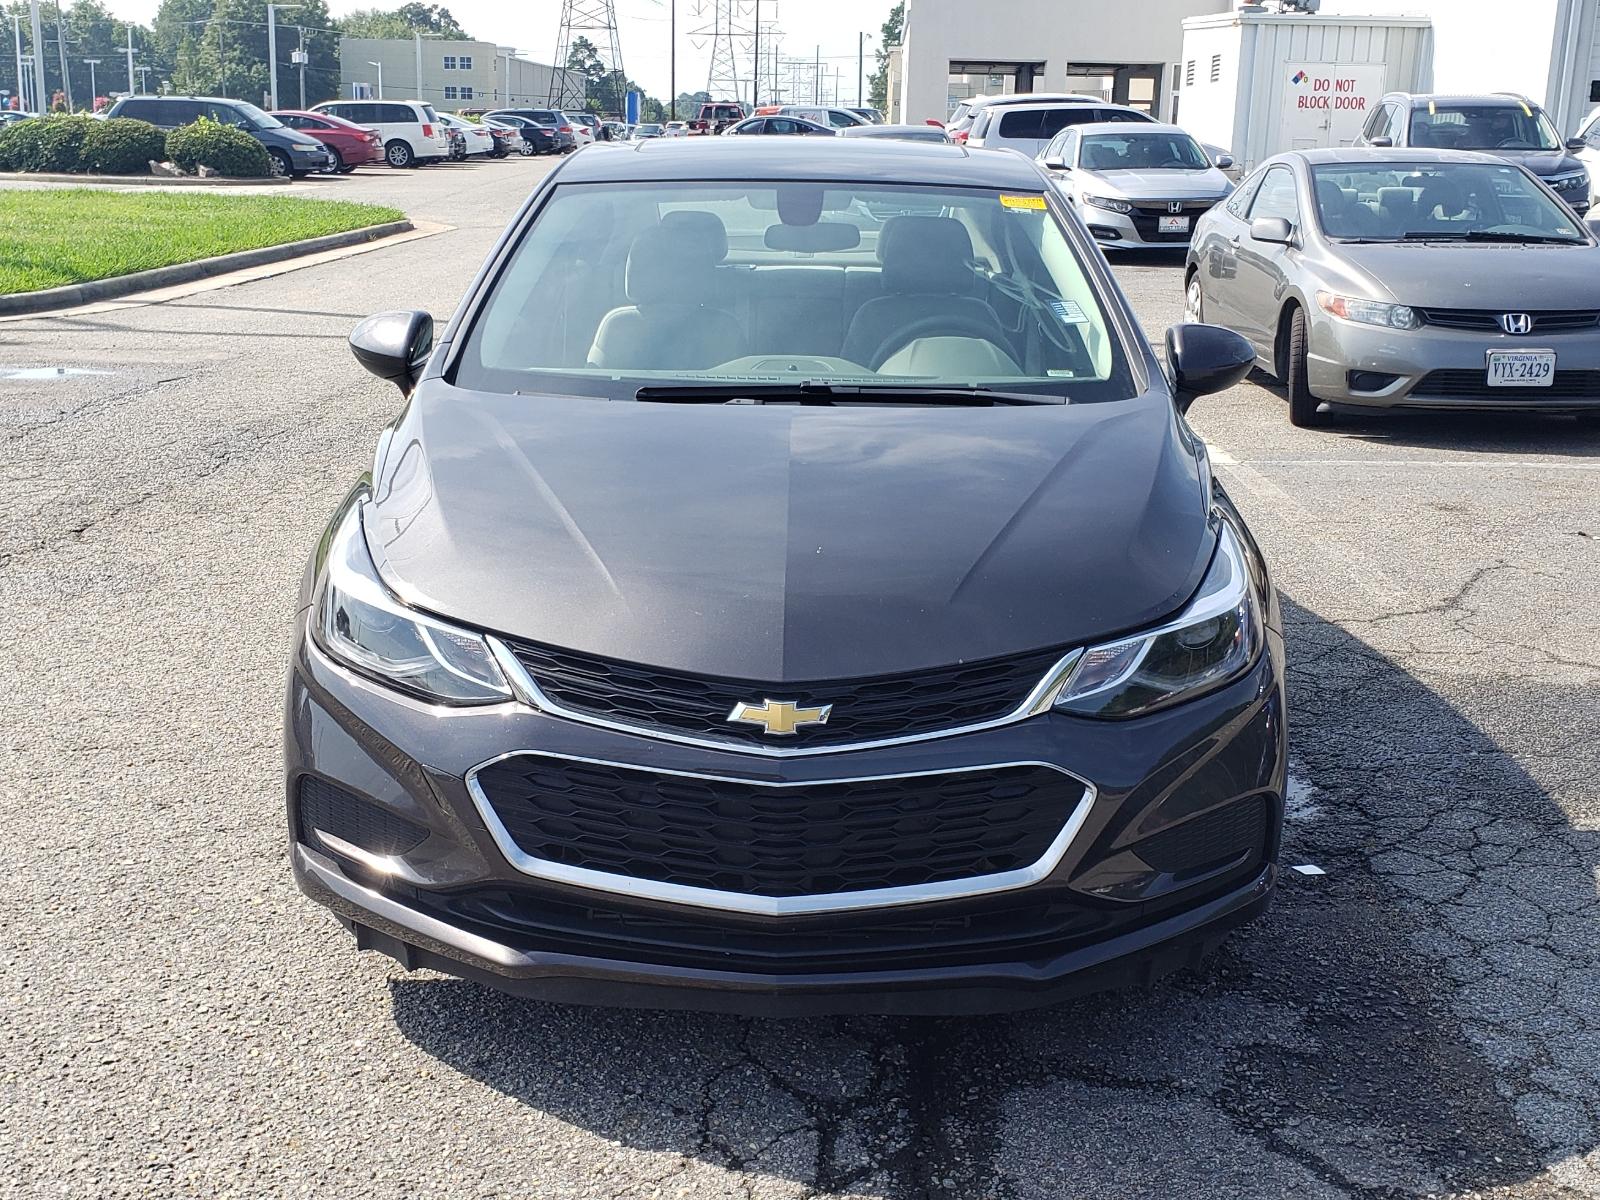 PreOwned 2017 Chevrolet Cruze 4dr Sdn 1.4L LT w/1SD 4dr